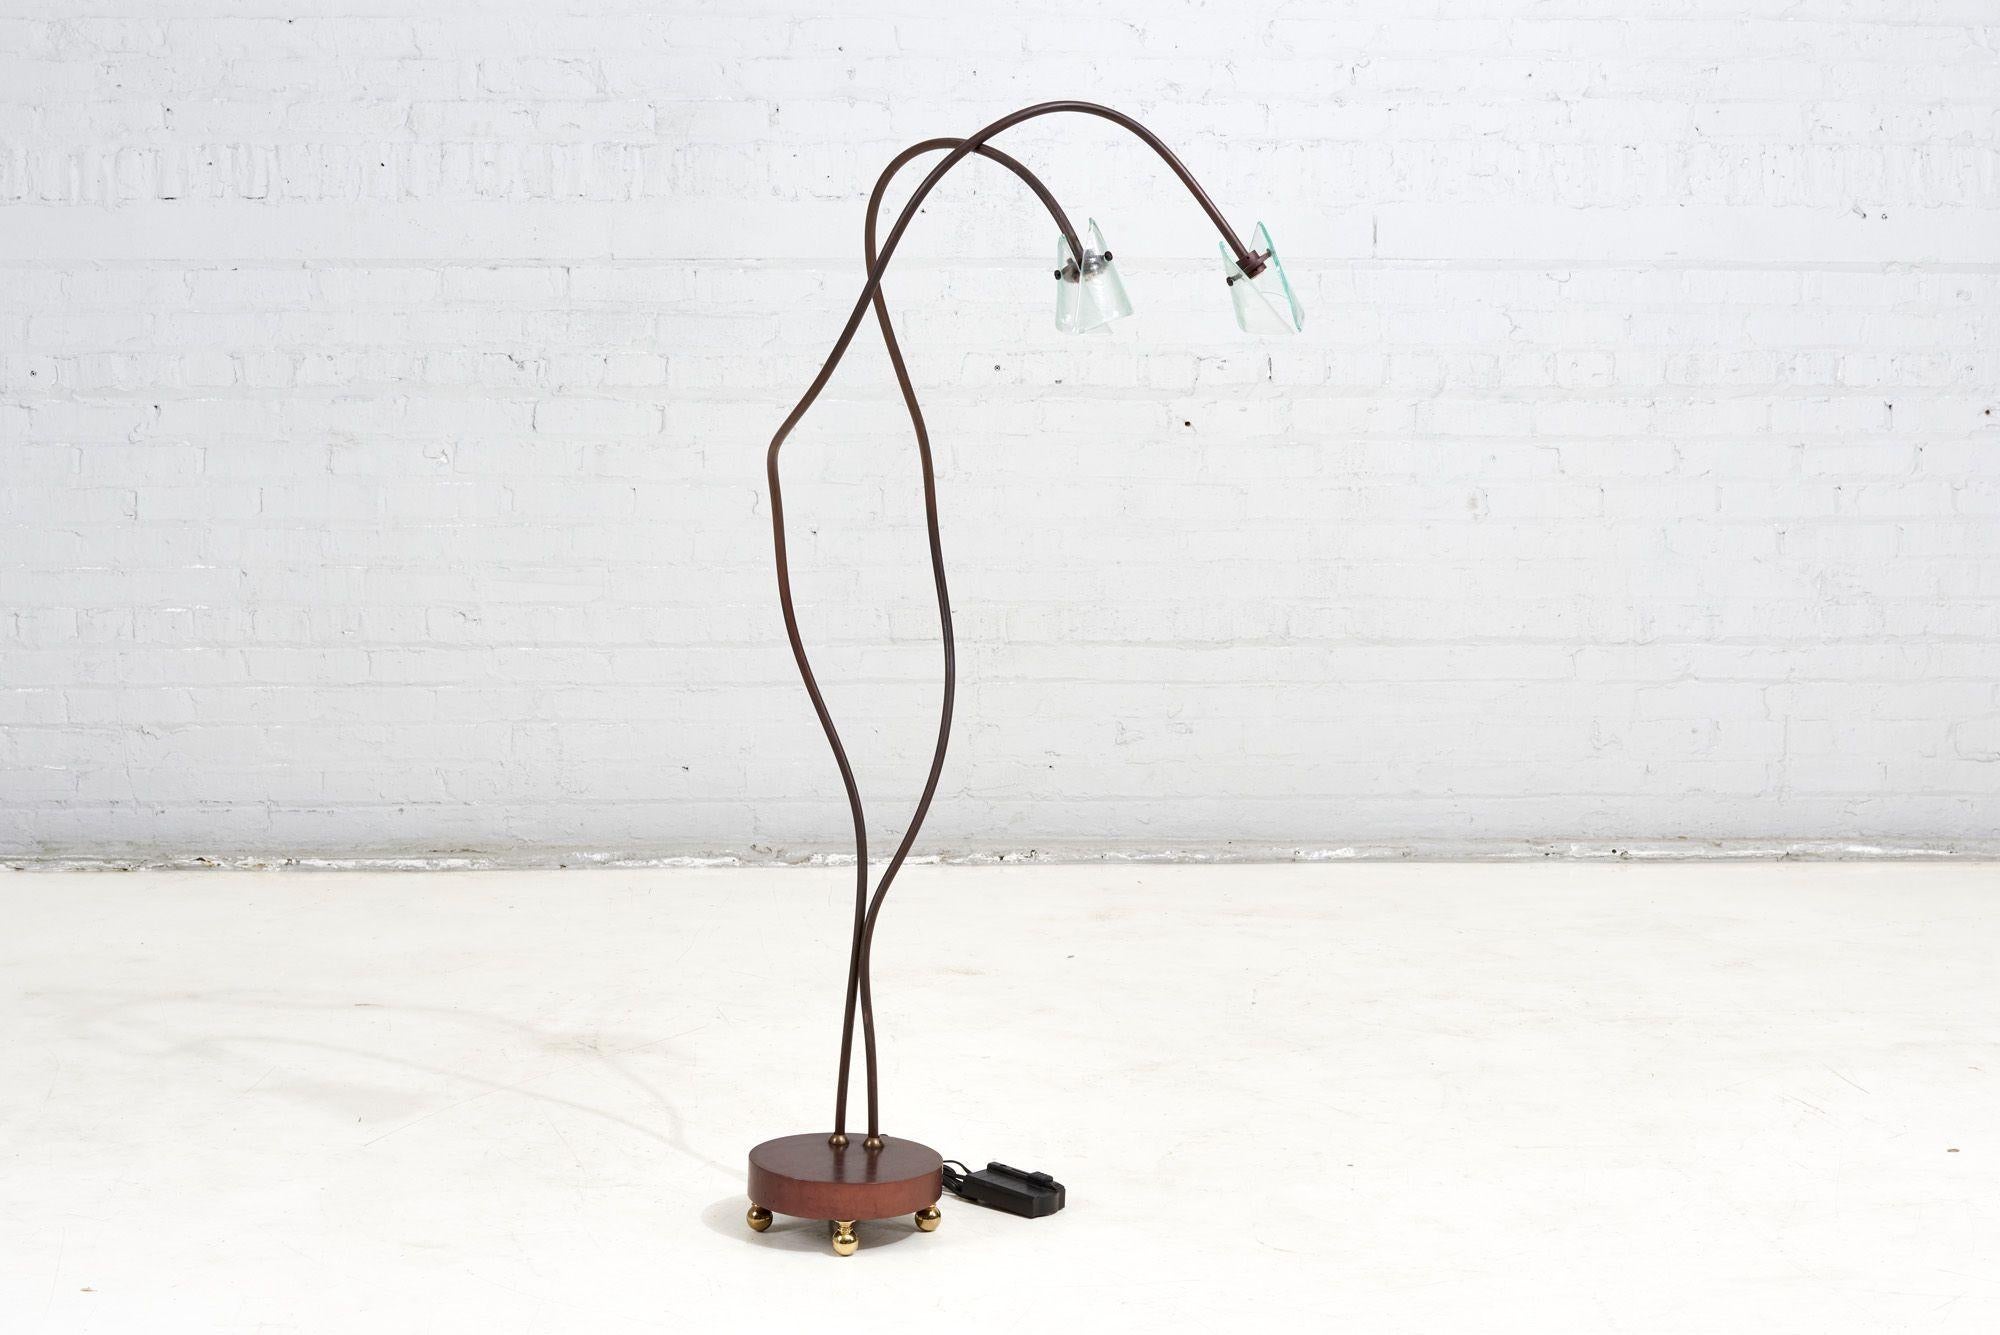 Floor Lamp Style of Ron Arad, Italy. Lamp is absolutely gorgeous, sits on wooden base with brass ball feet.
Measures 4' 3.5